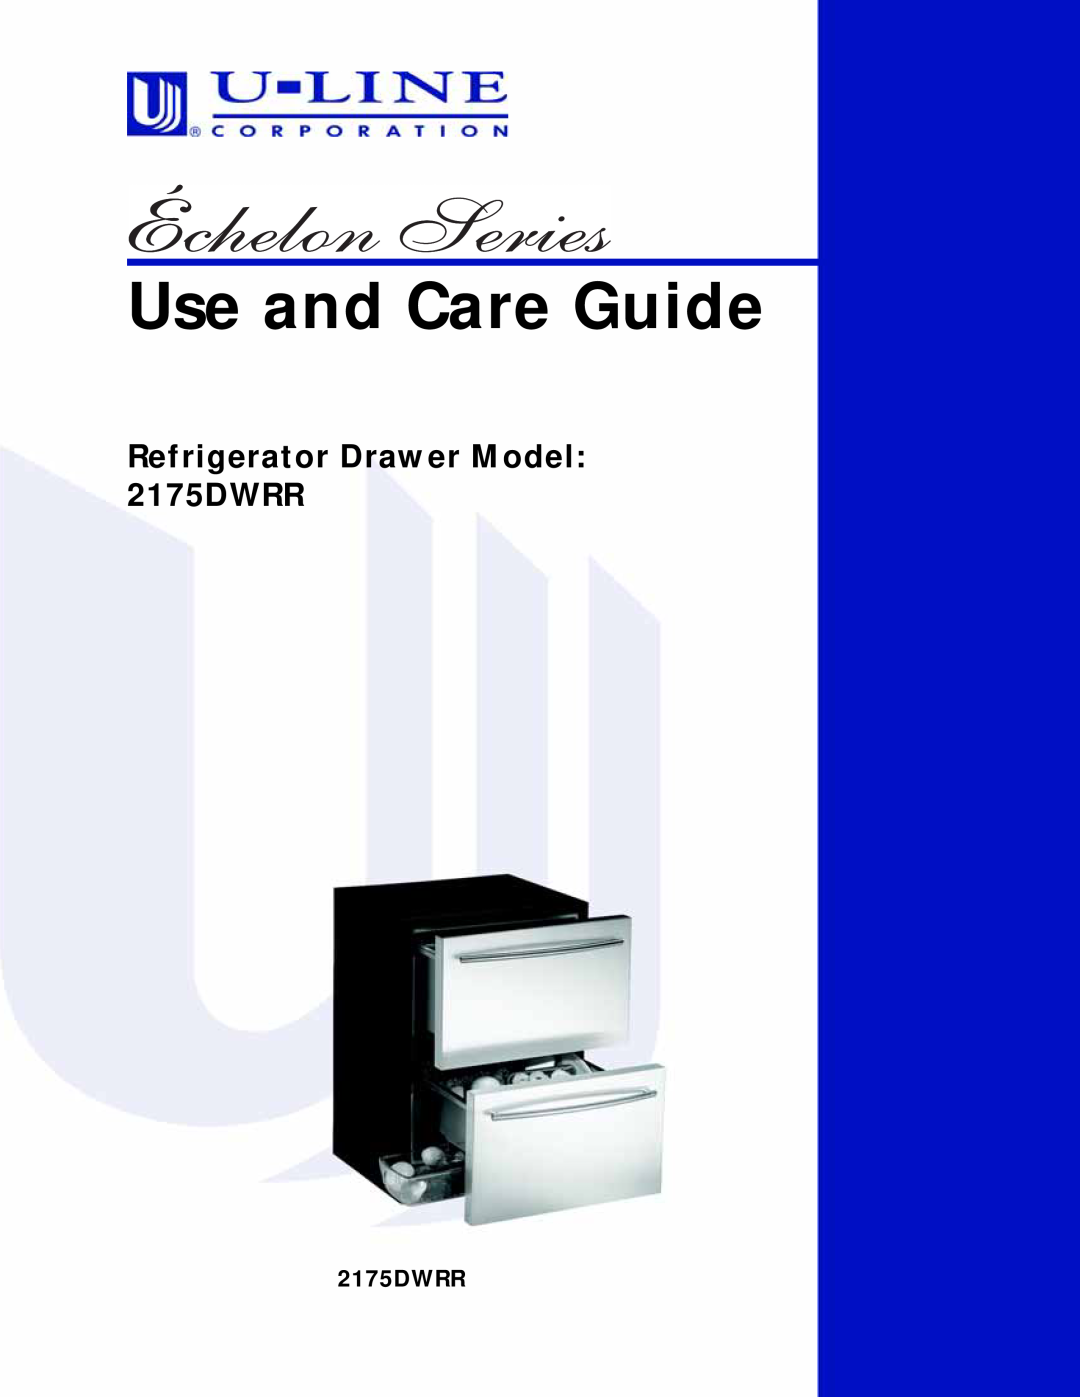 U-Line manual Use and Care Guide, Refrigerator Drawer Model 2175DWRR 